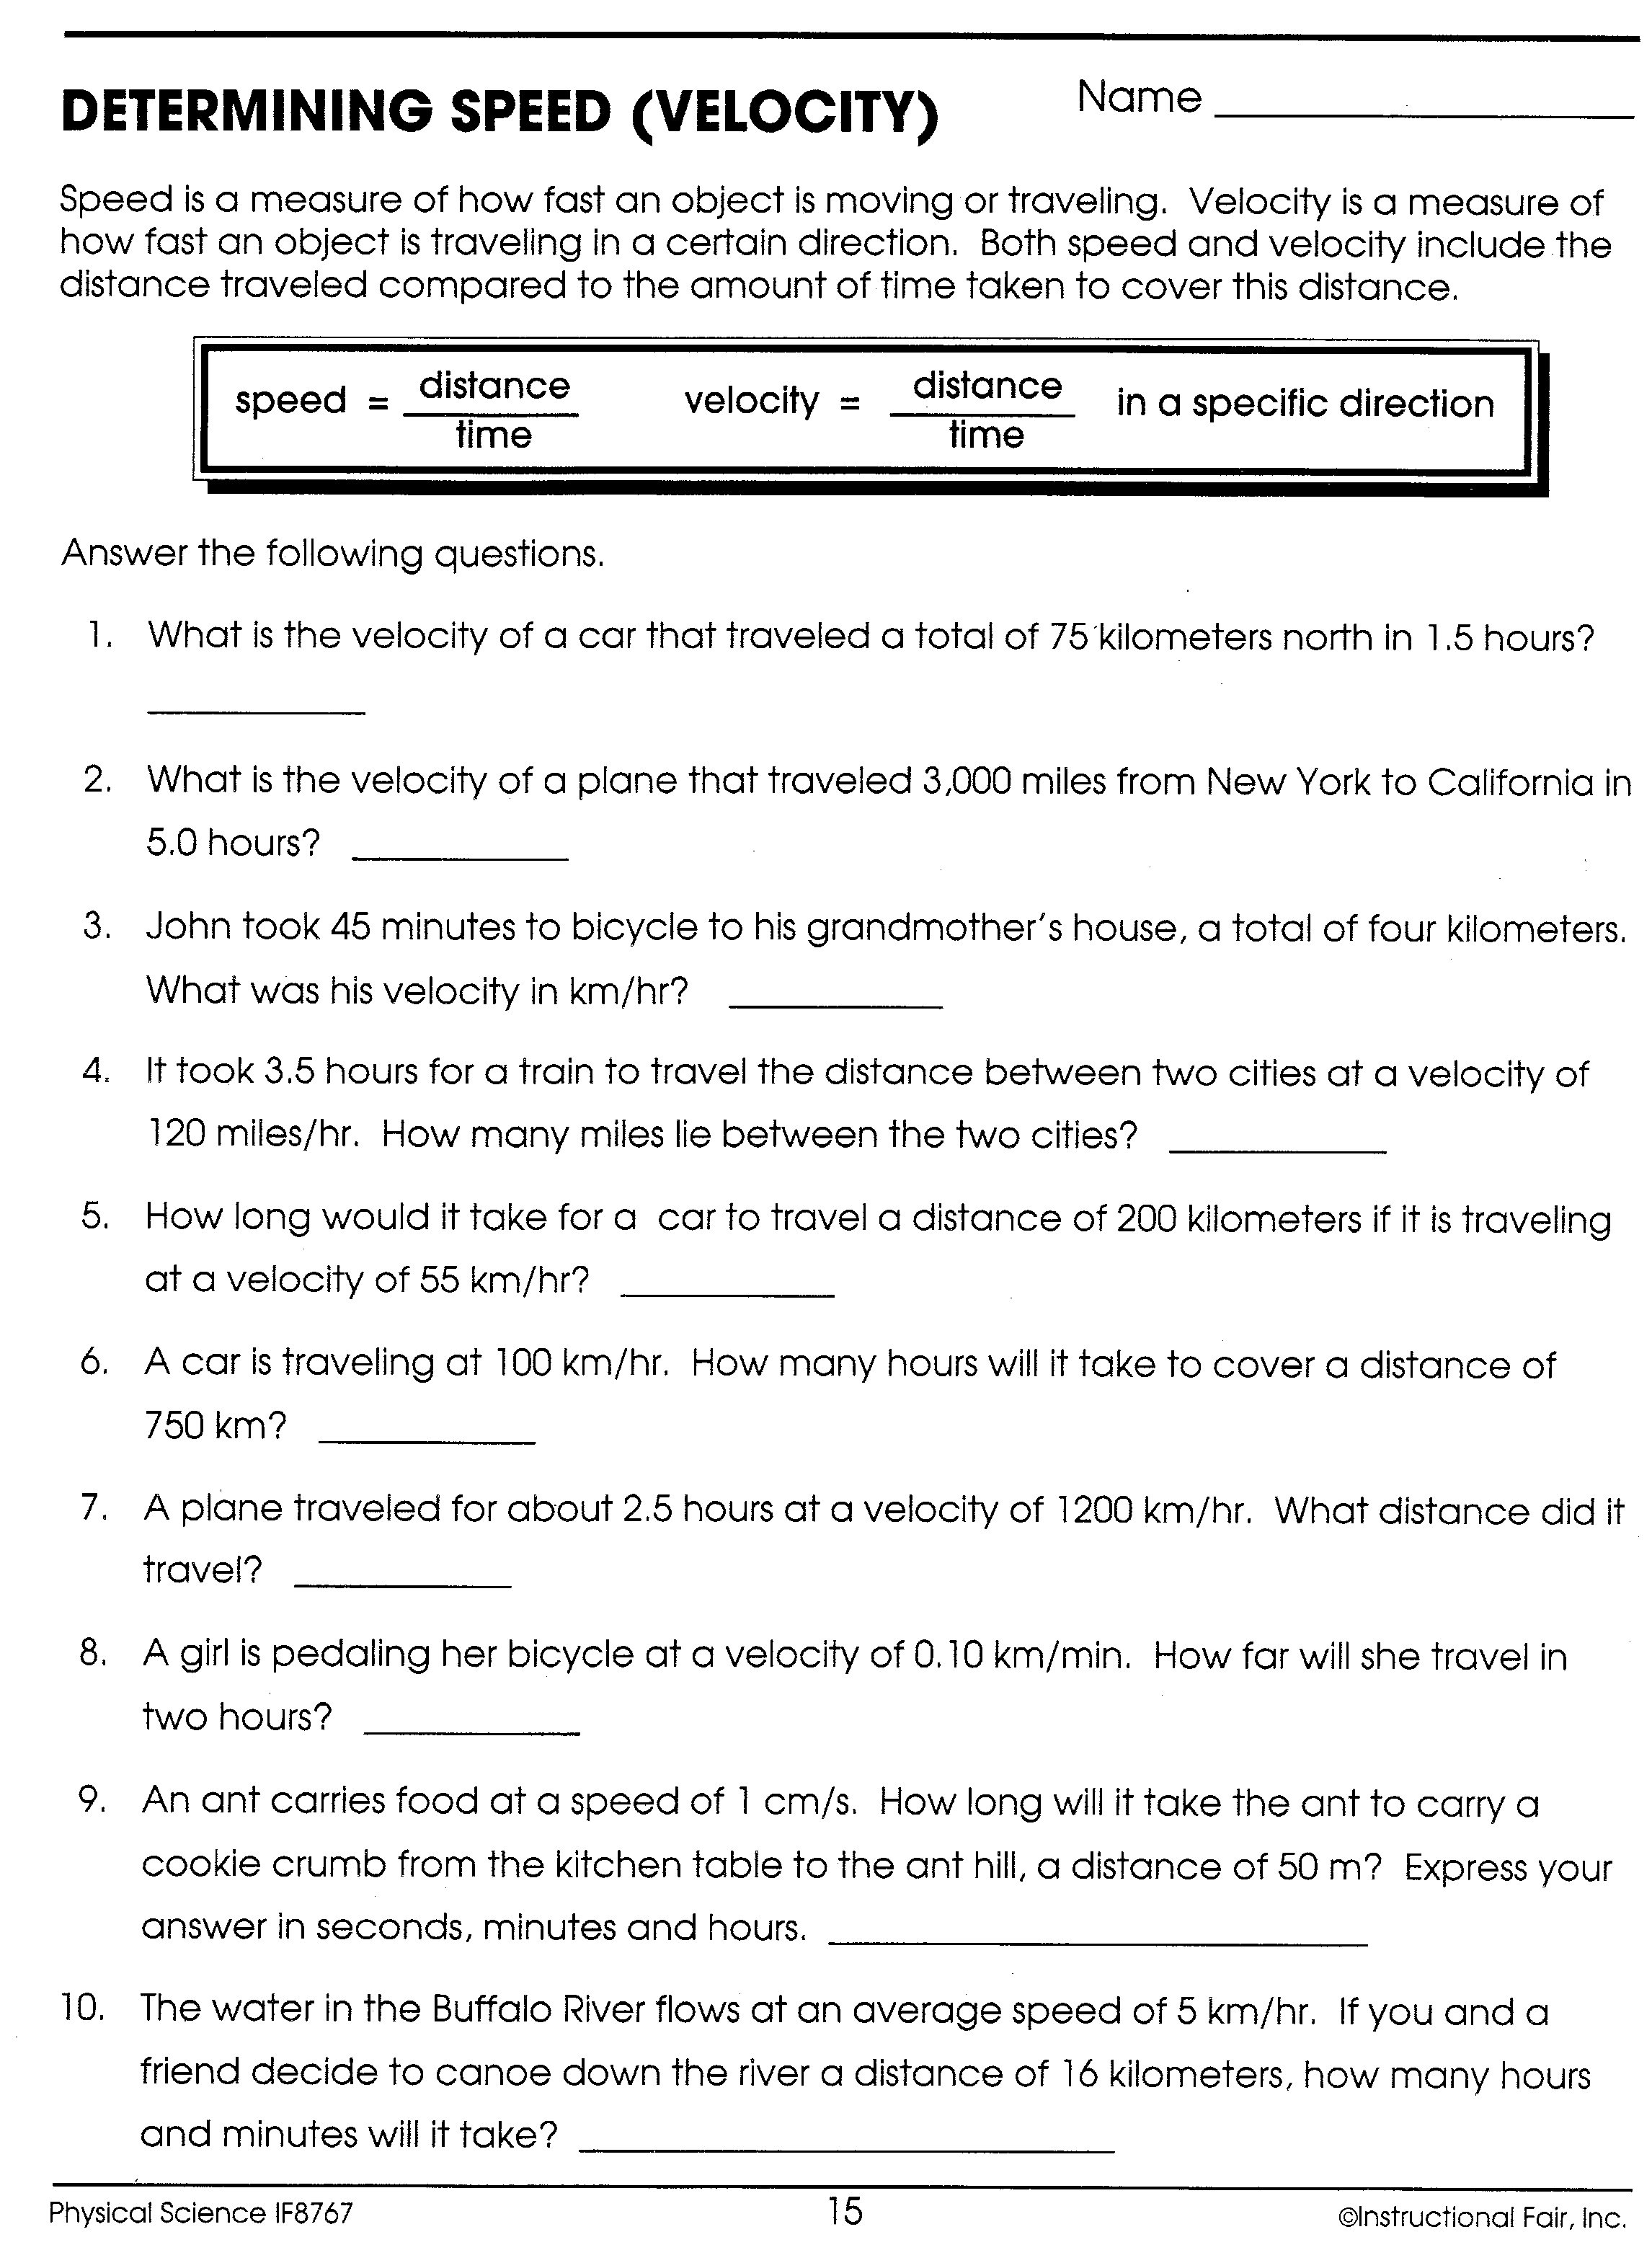 Speed & Velocity - Lessons - Blendspace With Speed And Velocity Worksheet Answers